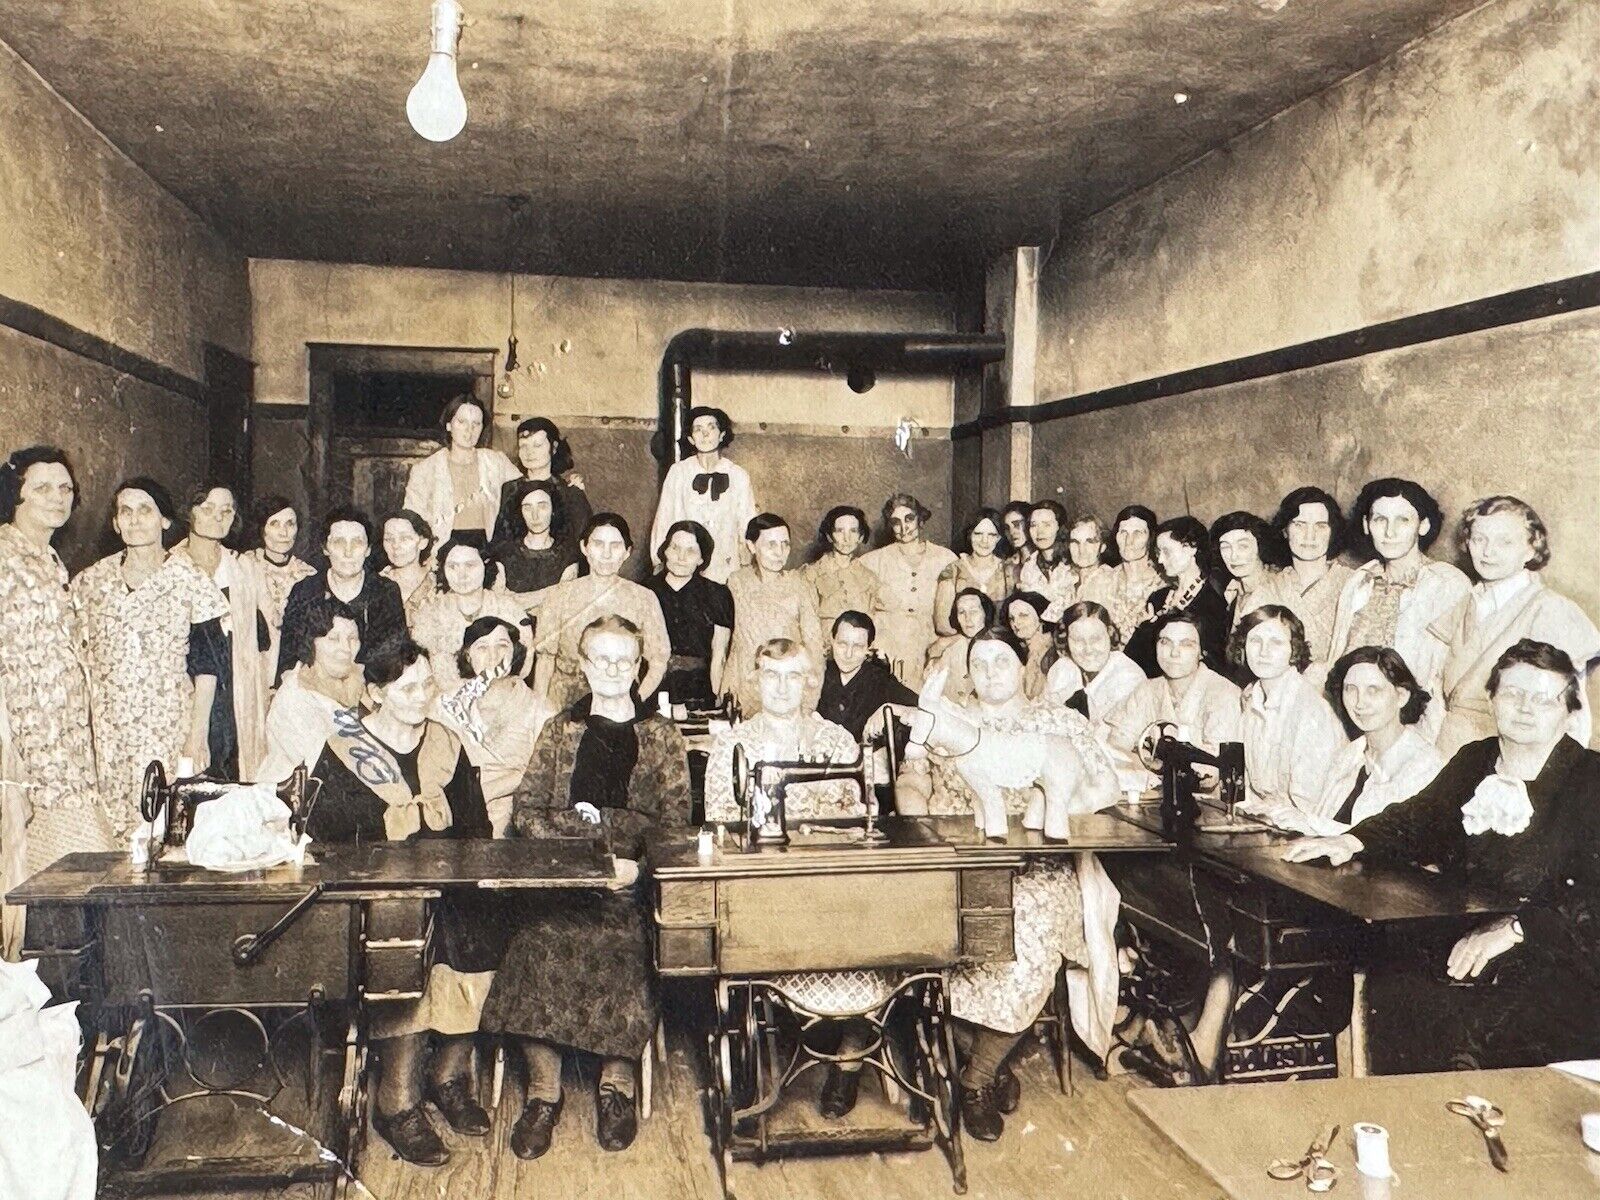 Women In Sewing Room At Grant Beach Park Springfield Missouri MO 1930s 